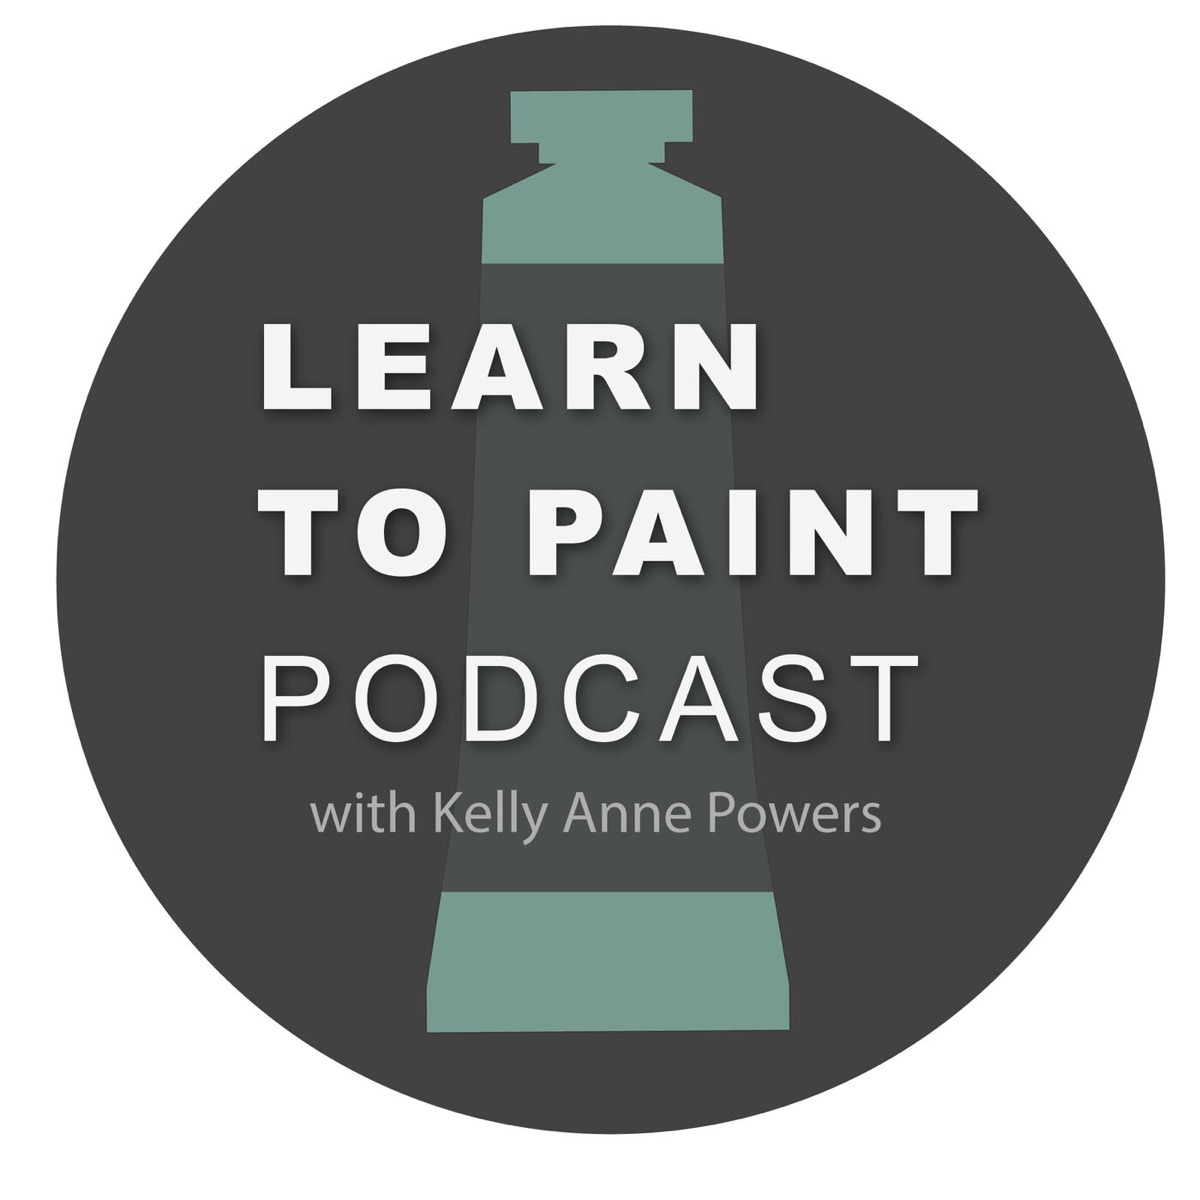 Do You Have to Use Turpentine for Oil Painting? — Learn to Paint Podcast